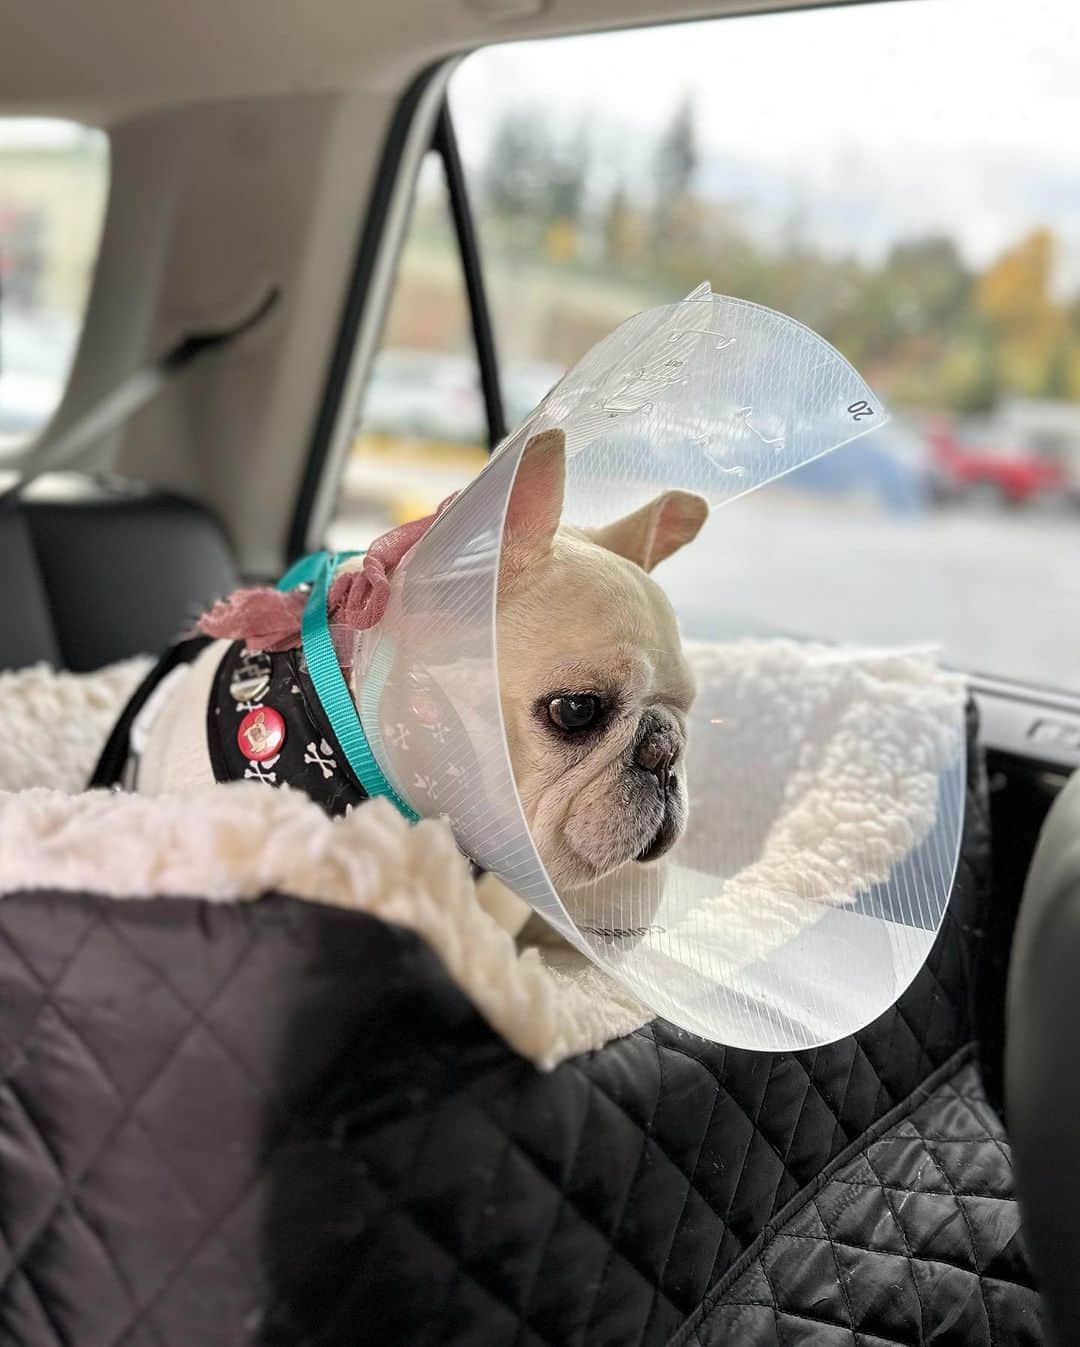 Sir Charles Barkleyのインスタグラム：「When you can’t get reception in the car #thebiggerthebetter  Barkley had surgery yesterday to remove a mass on his eye lid that has been bothering him. We are always nervous taking him to procedures that require anesthesia but he thankfully did really well. He’s not so happy about the cone he has to wear all week though but sissy is taking good care of him. 🙏🏼❤️」